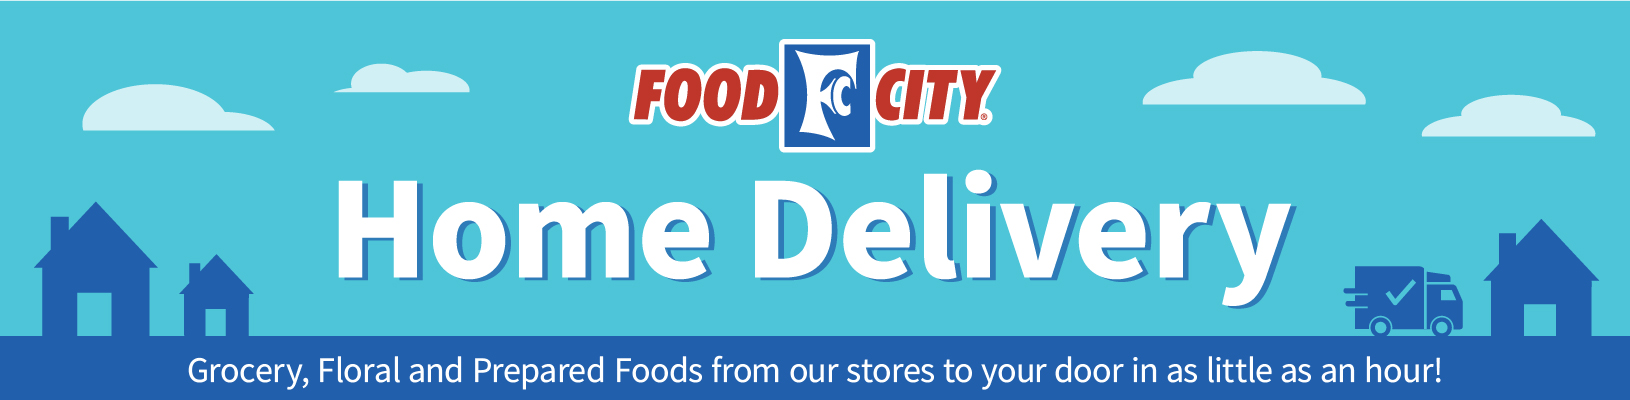 Order your groceries, household essentials and more online and get them delivered in as little as one hour from your local store Food City store.